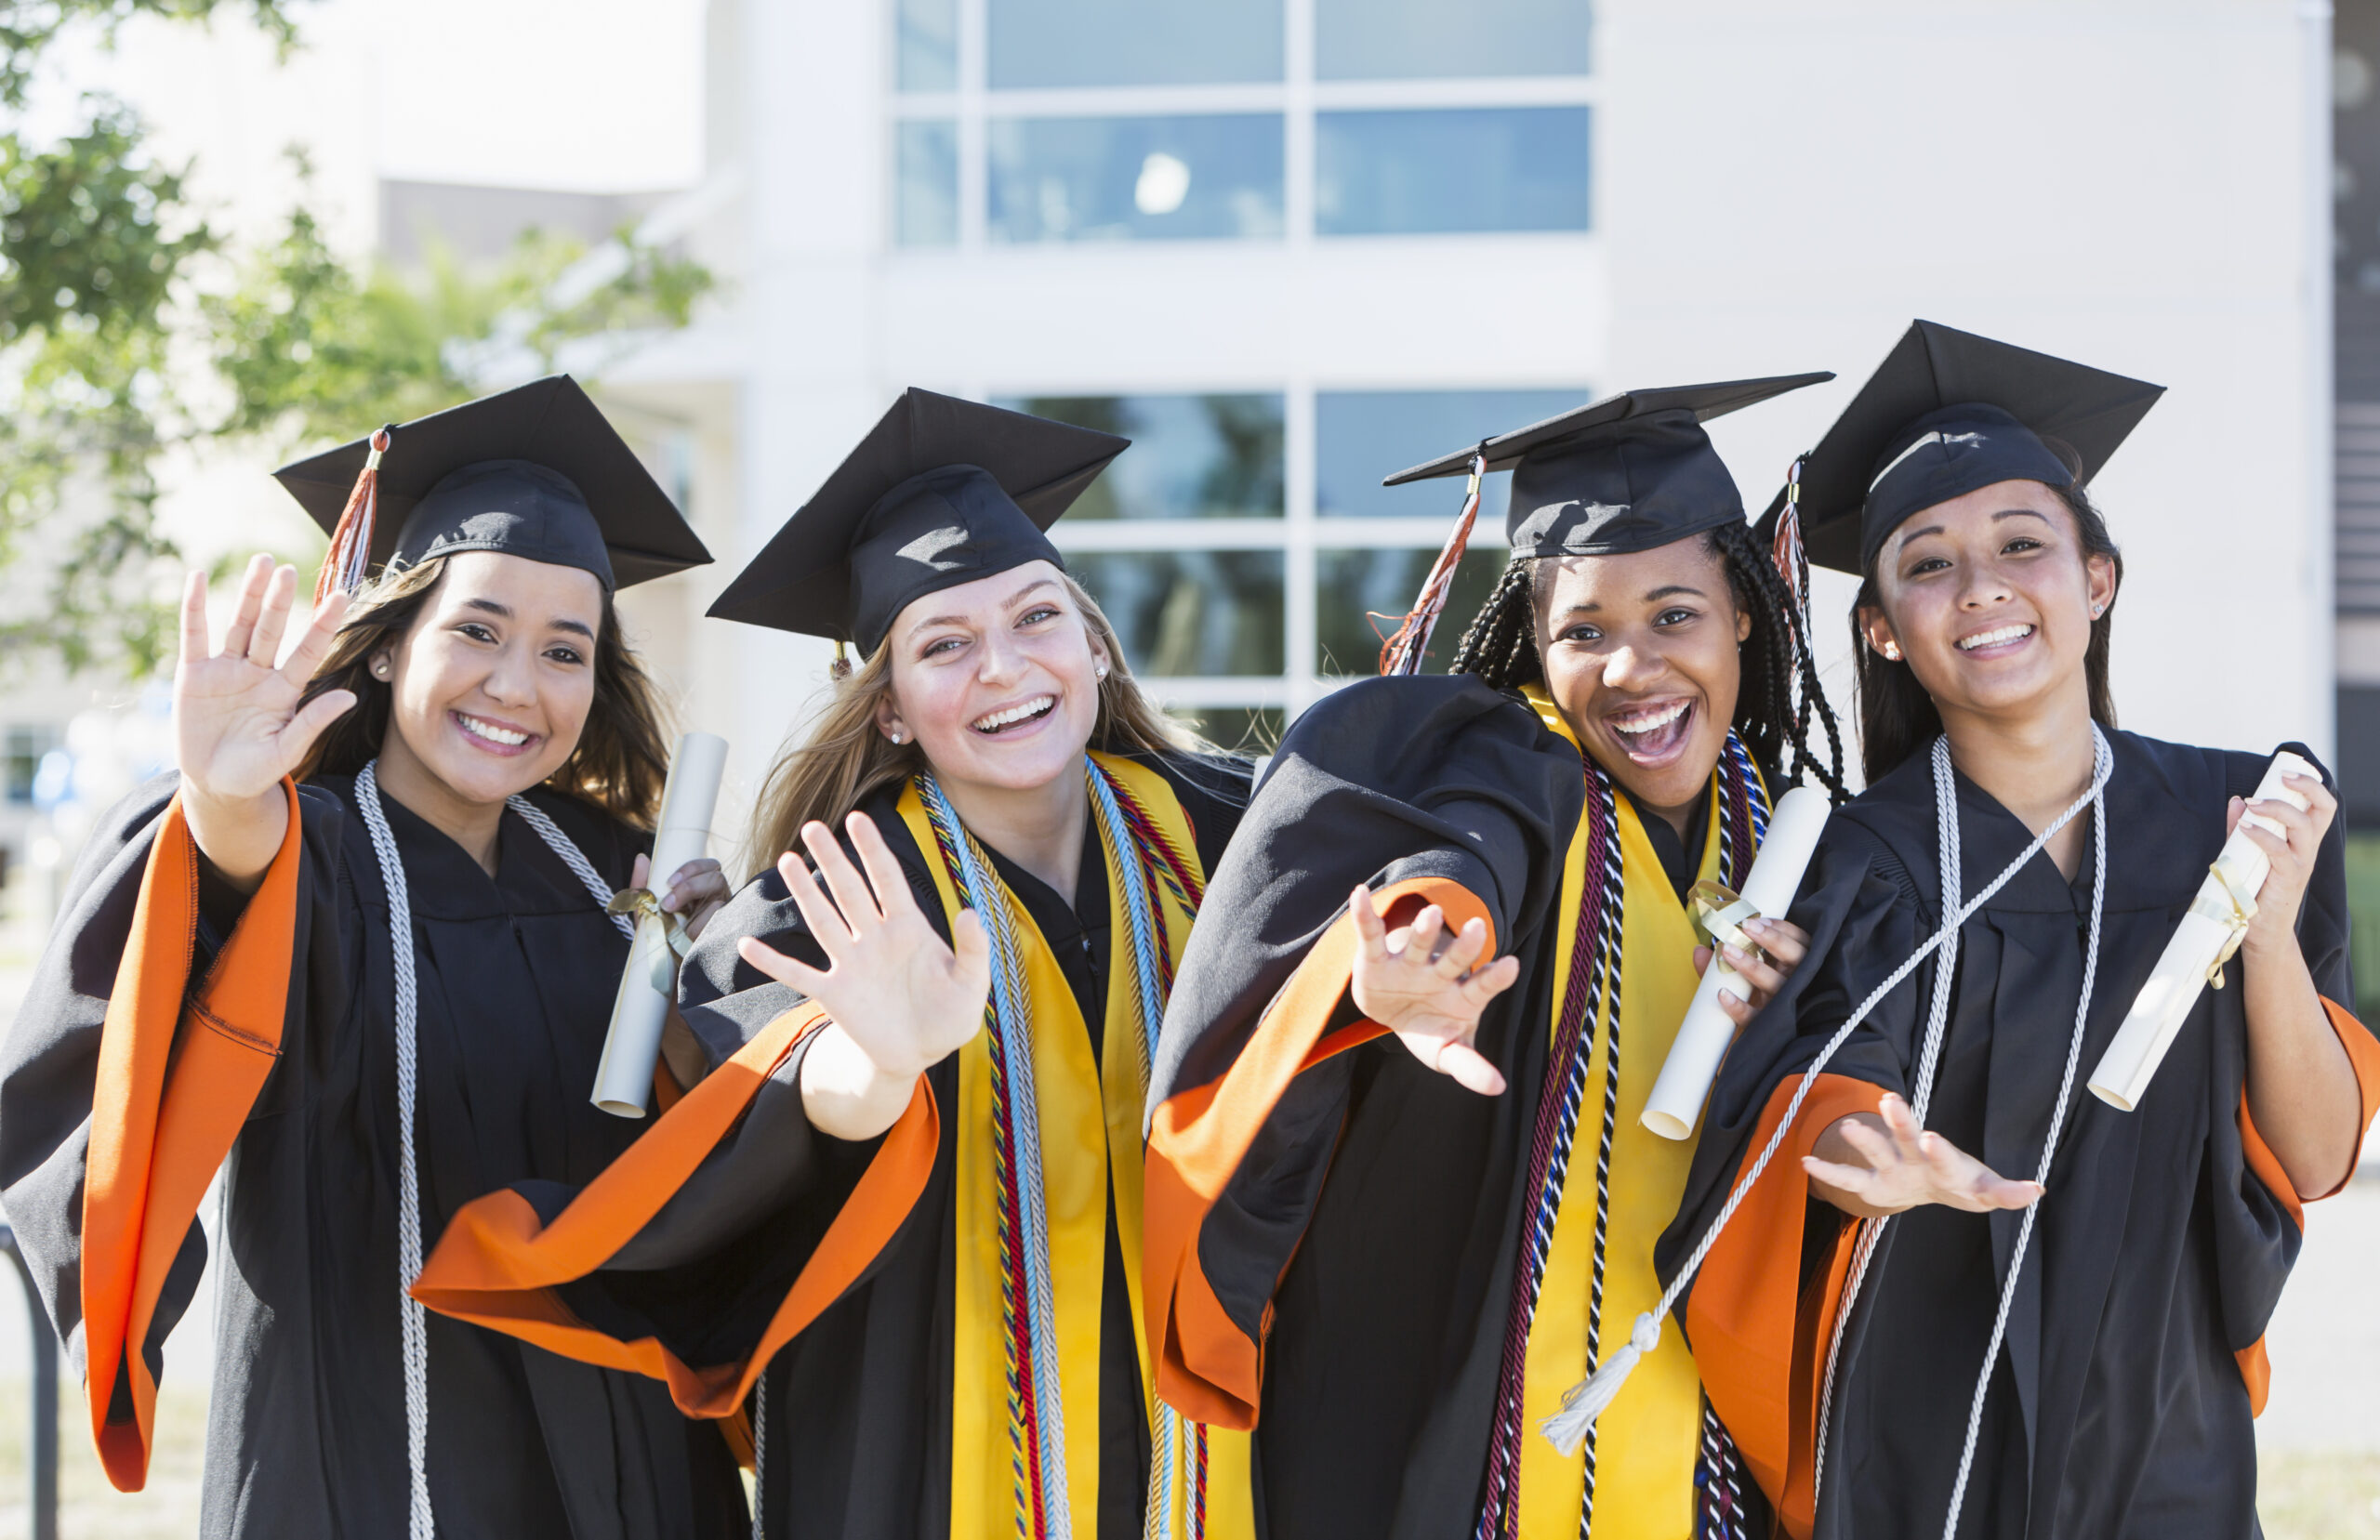 A group of four multi-ethnic young women, 18 years old, wearing graduation caps and gowns, holding diplomas, smiling at the camera, waving.